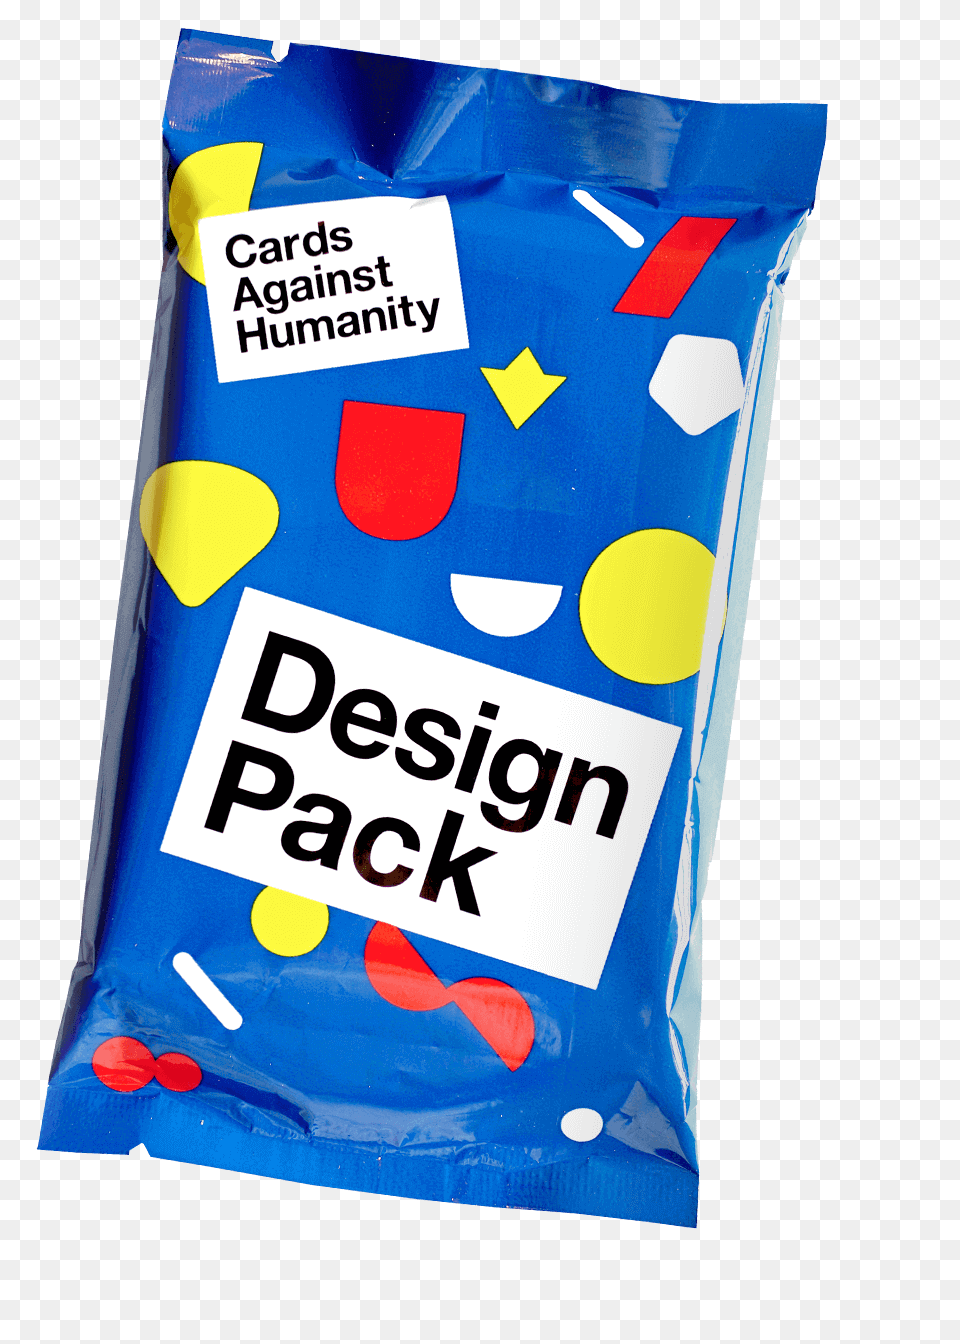 Cards Against Humanity Store, Food, Sweets, Bag Free Png